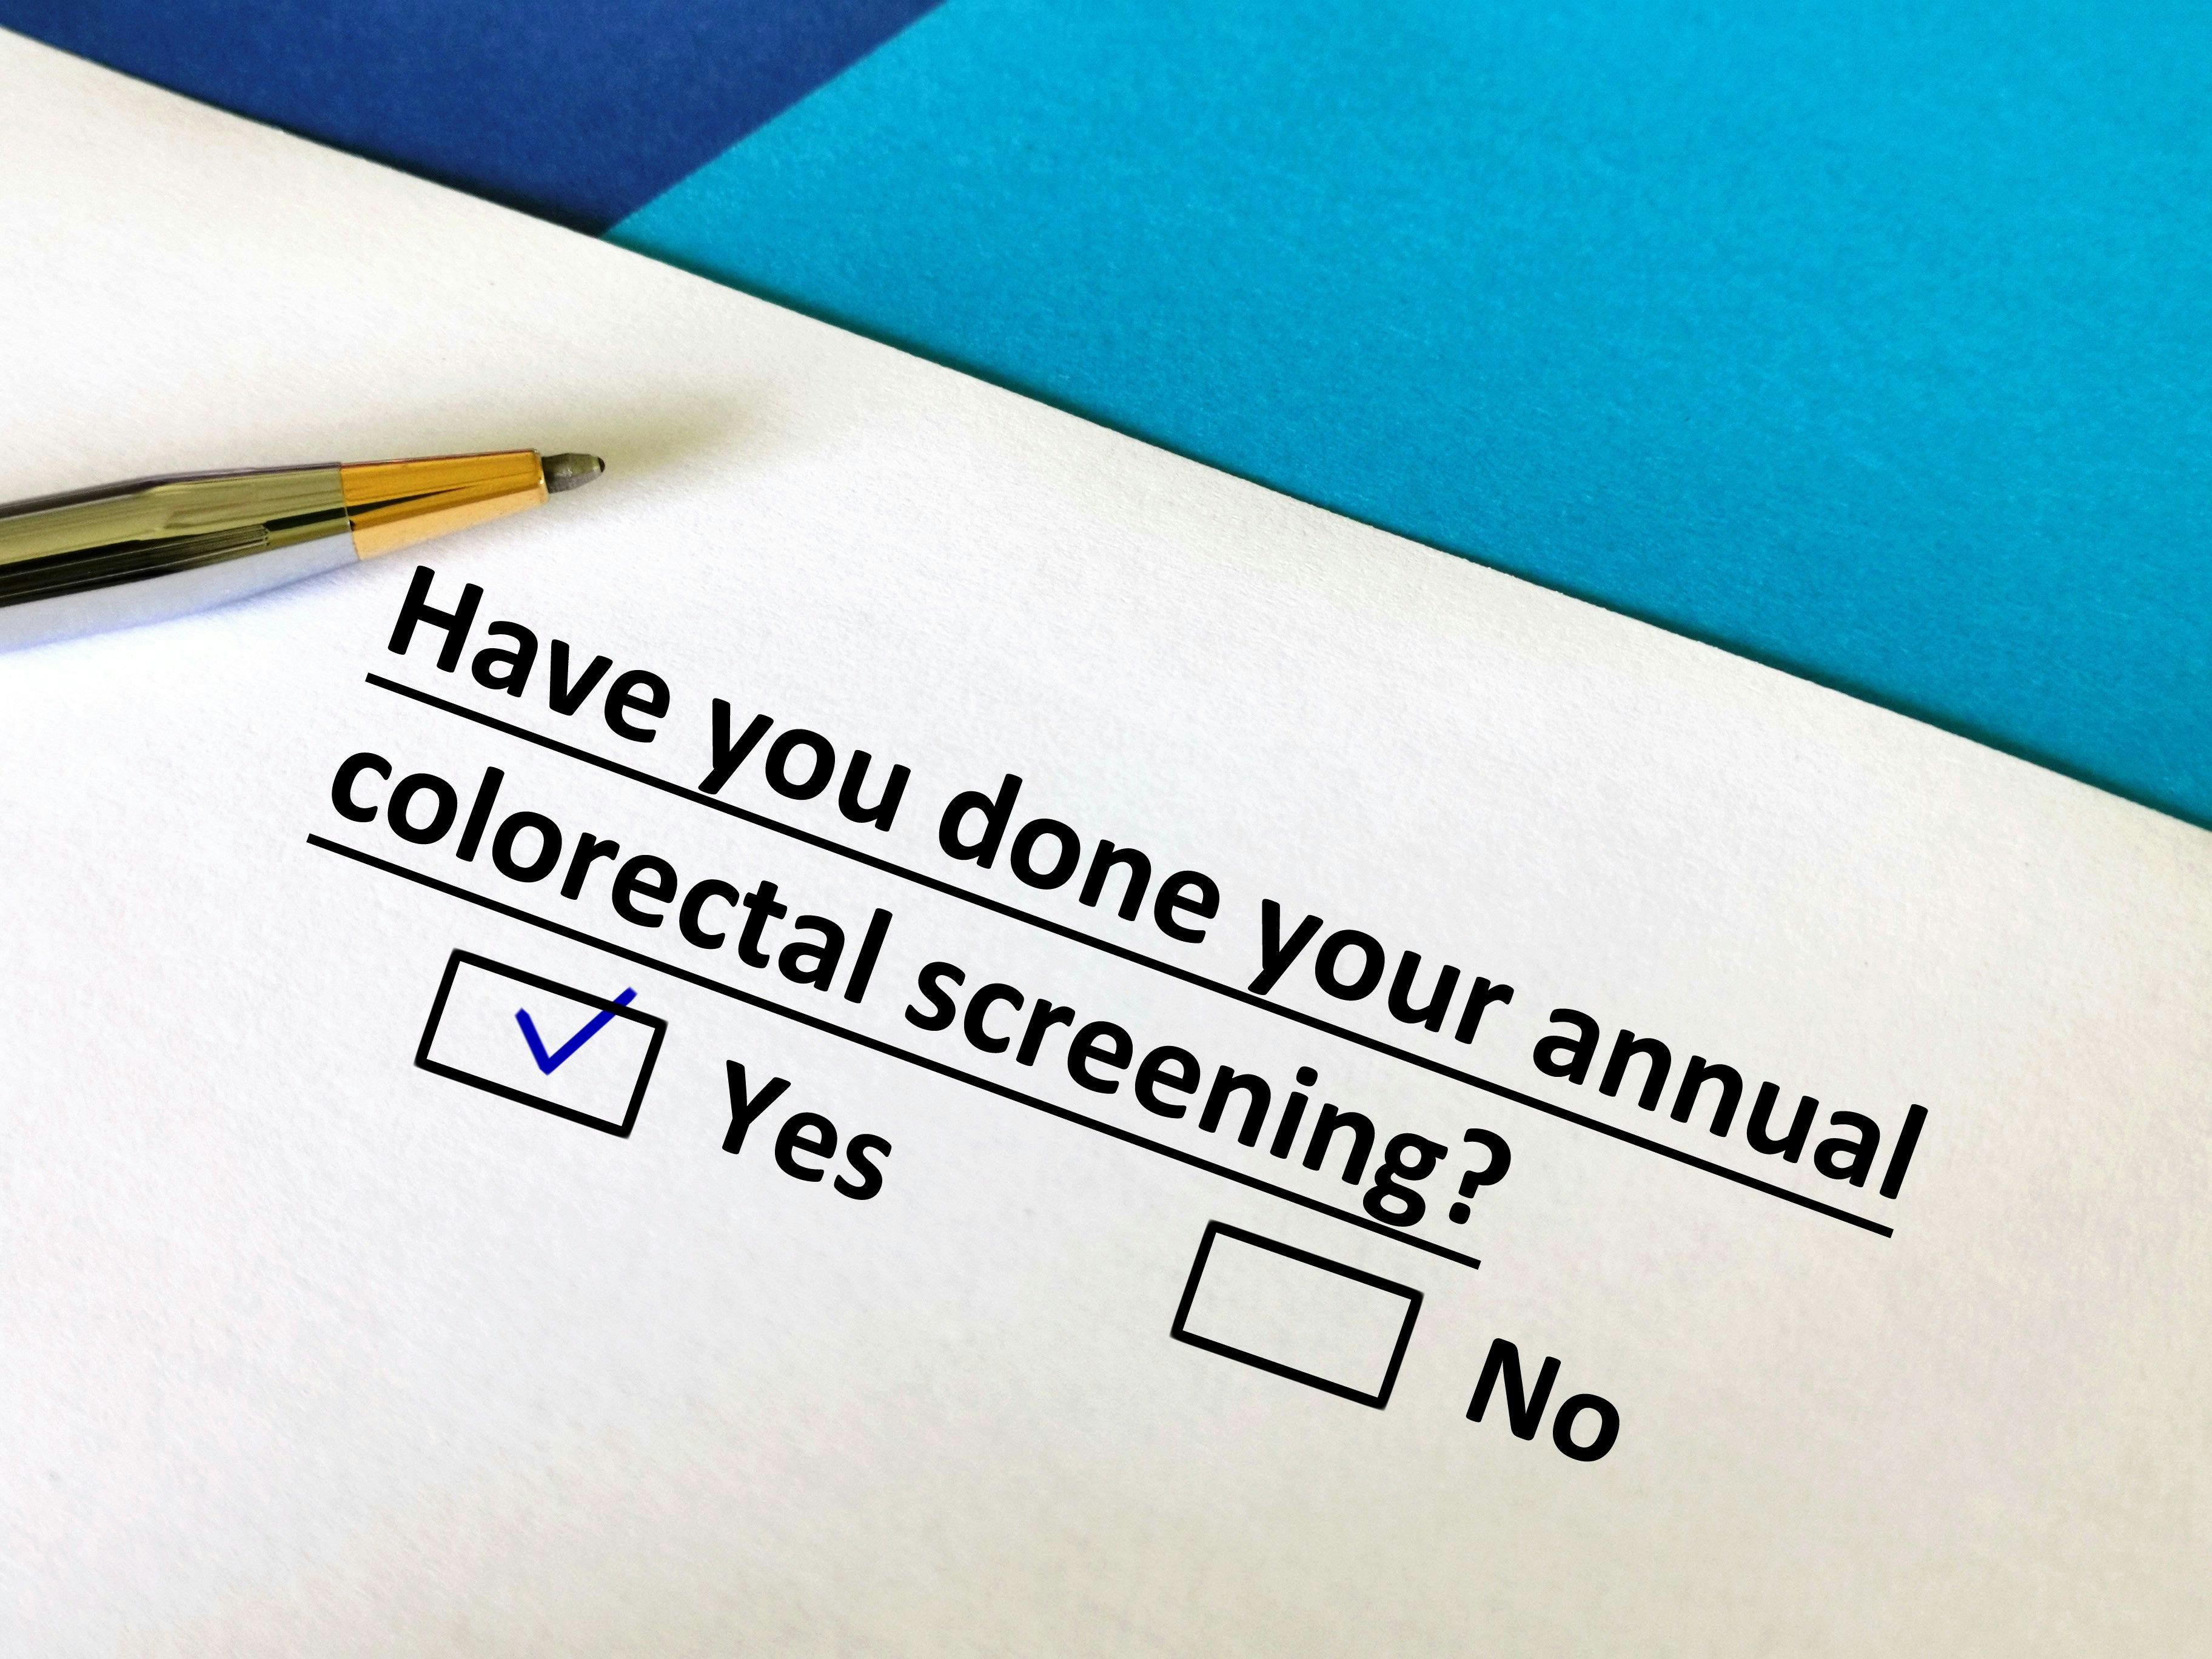 Colorectal screening questionnaire | Image credit: Richelle - stock.adobe.com